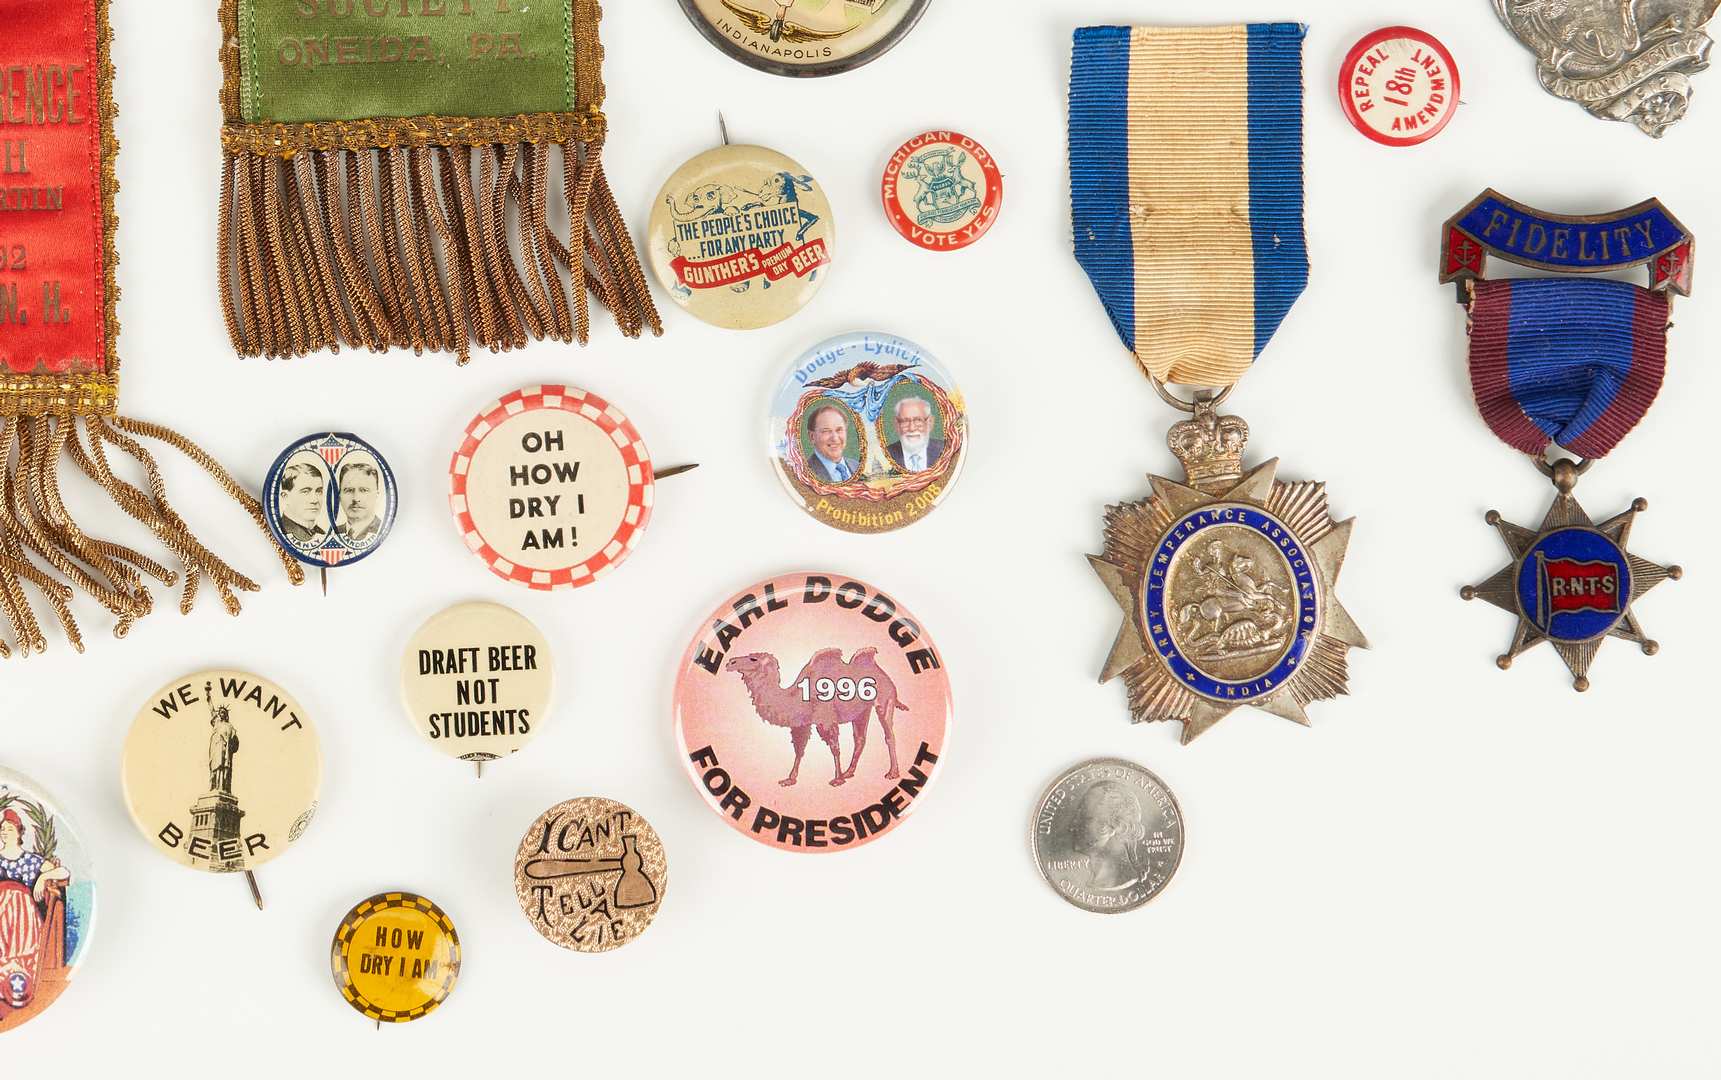 Lot 687: Group of Prohibition/Temperance Related Ephemera, incl. Campaign Buttons